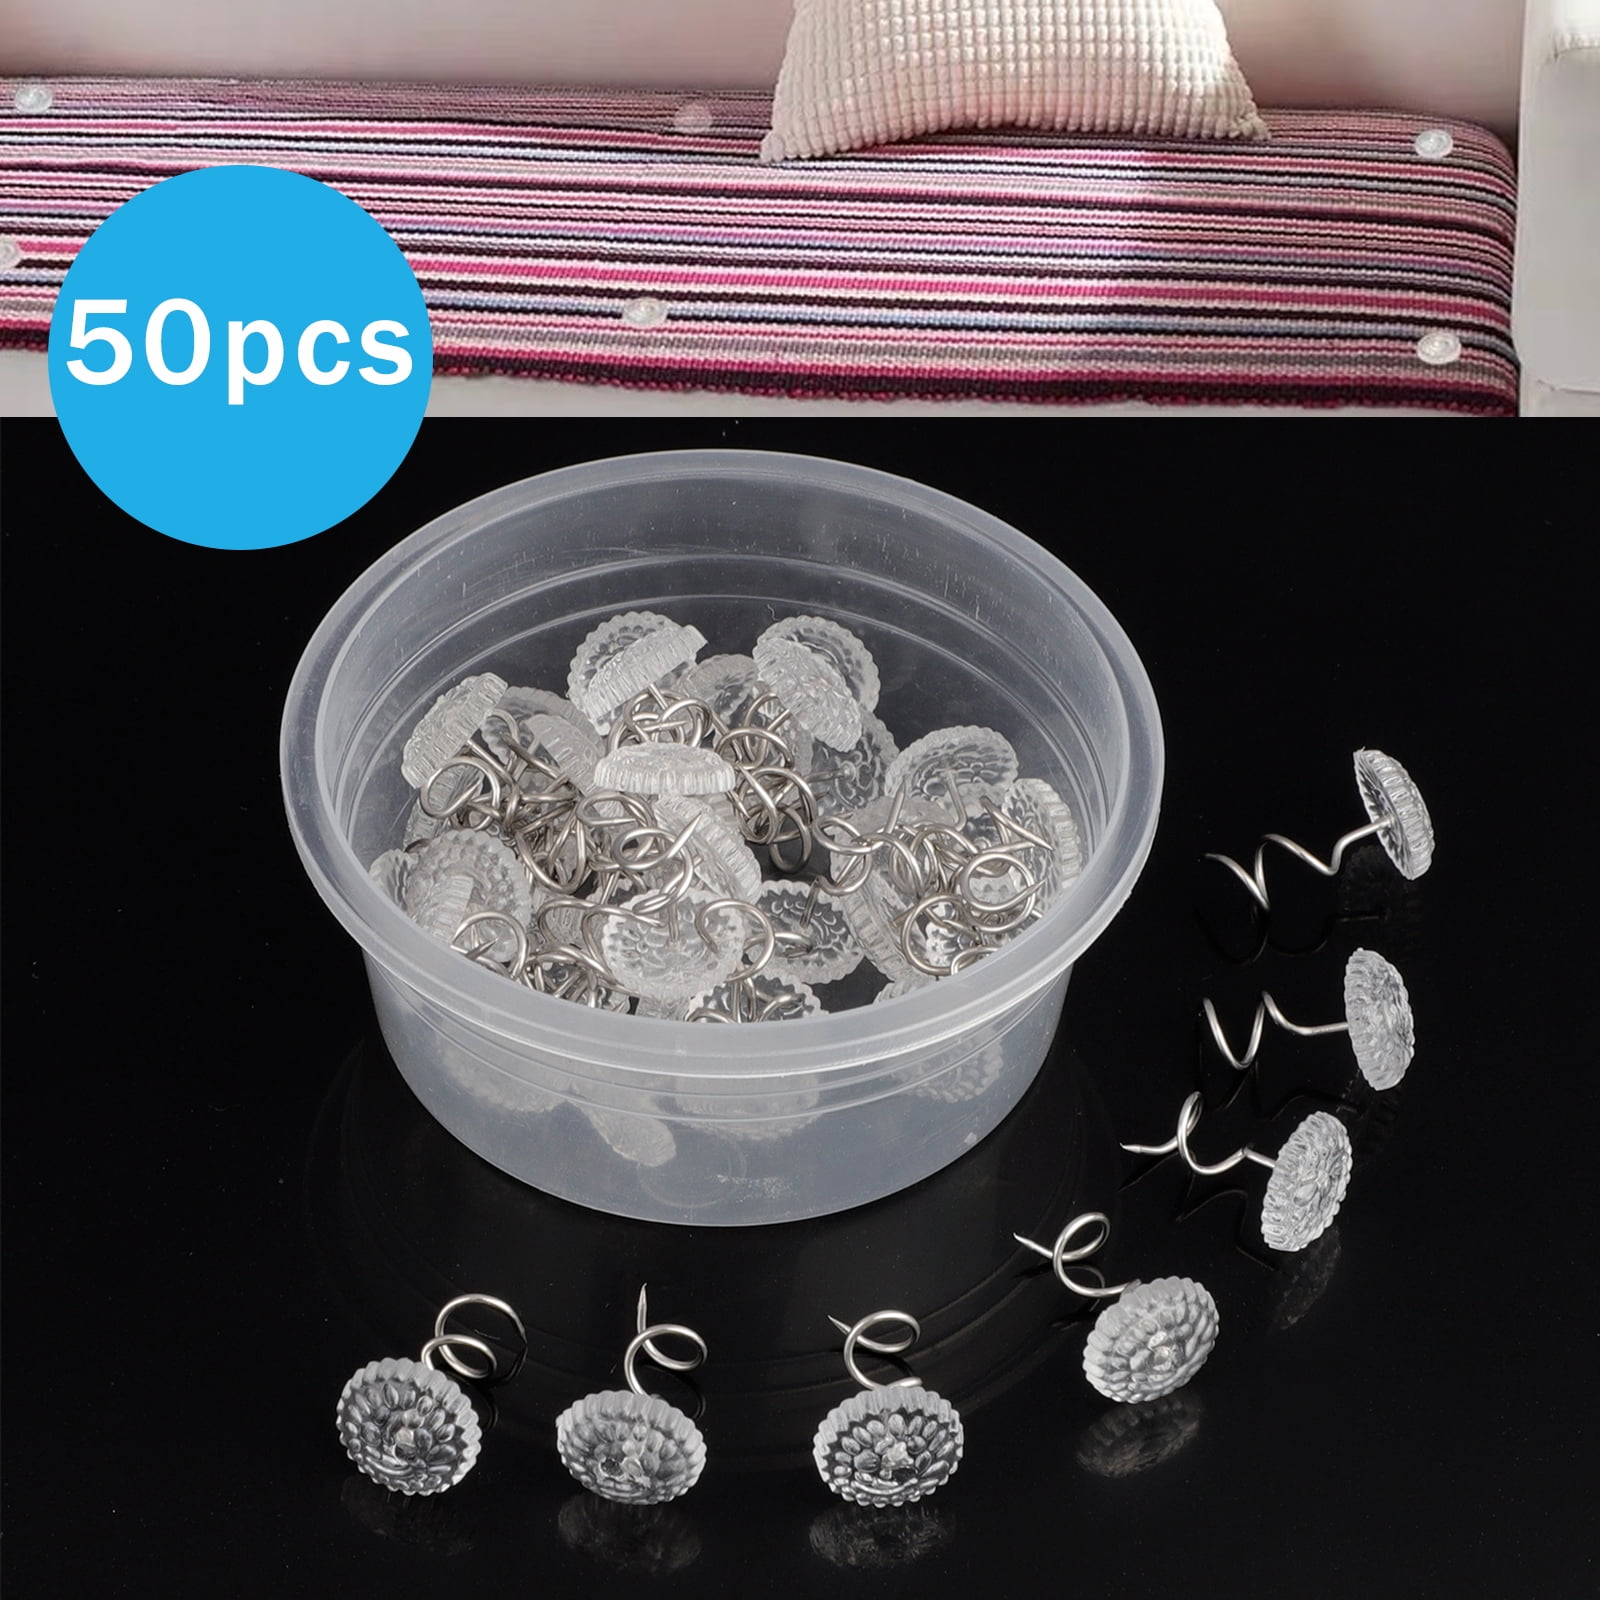 Clear Heads Yohope Home Decor Upholstery Twist Pins 30pcs Bed skirt Pins Fastener for Blankets Sofa Sets Chair Couch Furniture Car Slip Covers 